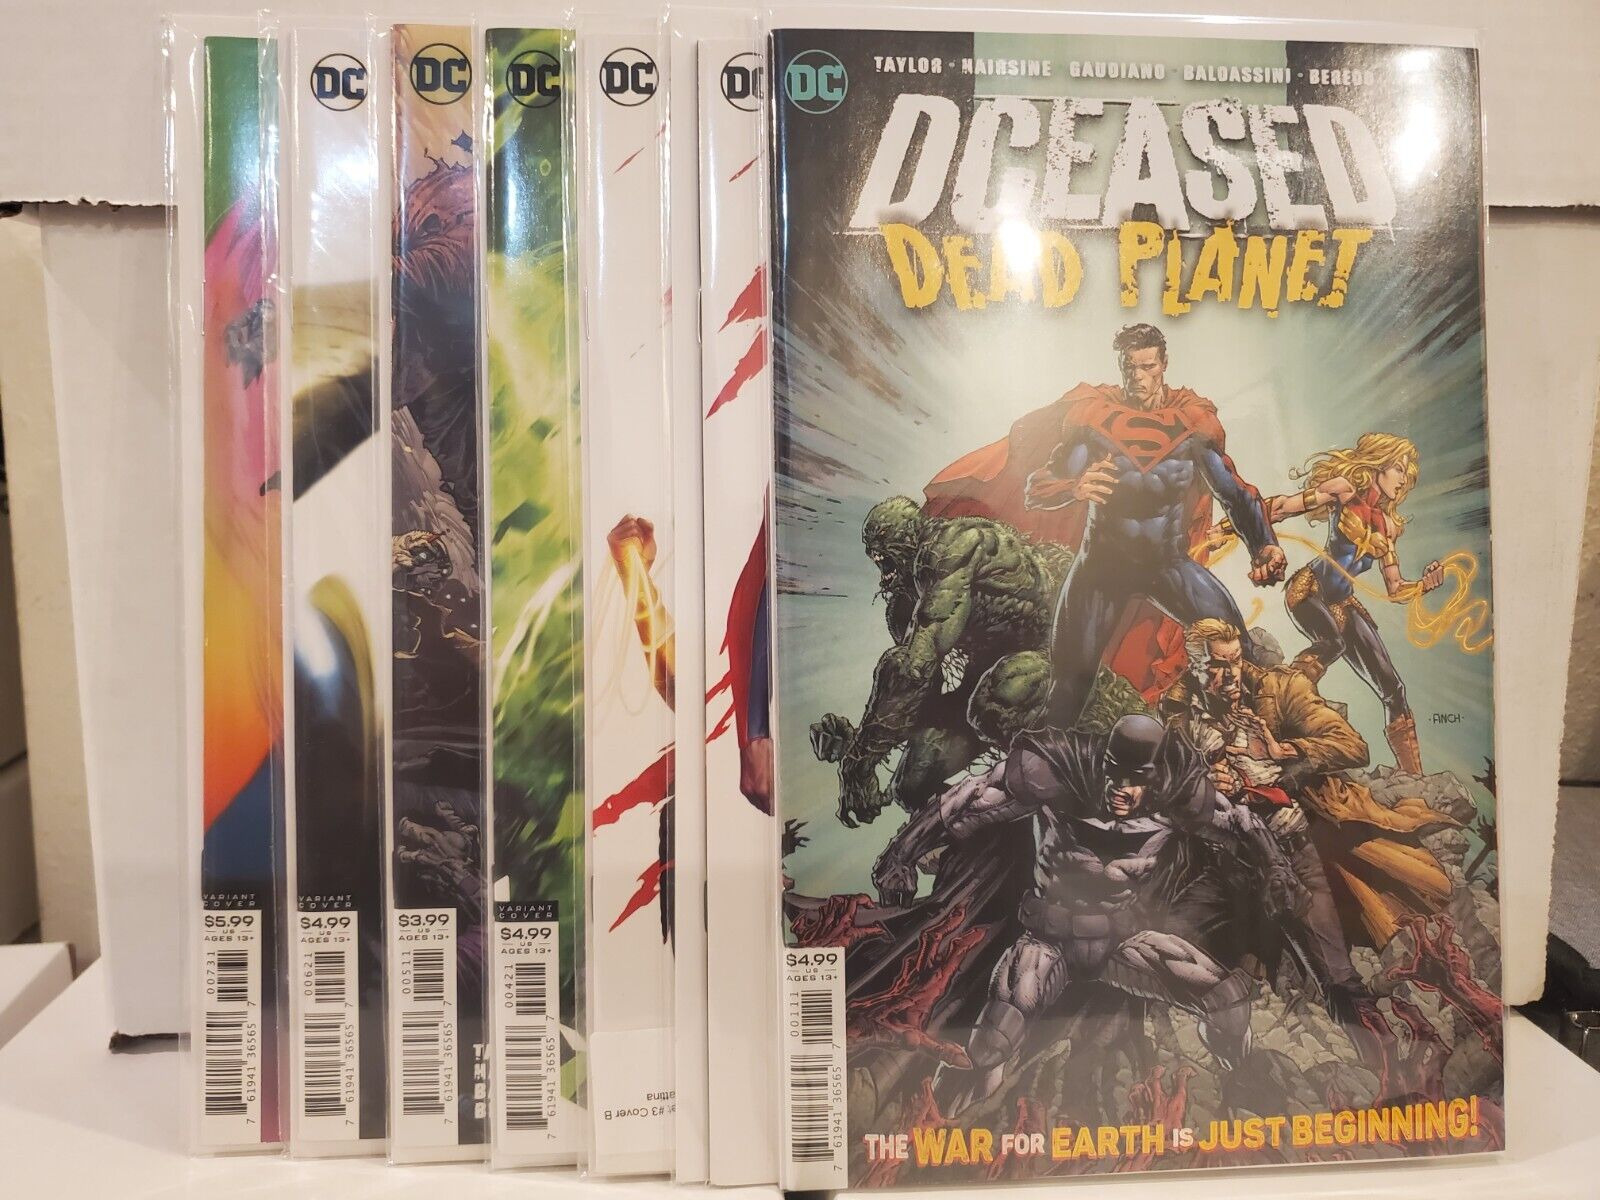 DCeased: Dead Planet full run #1 #2 #3 #4 #5 #6 #7 (DC 2020) comb. shipping